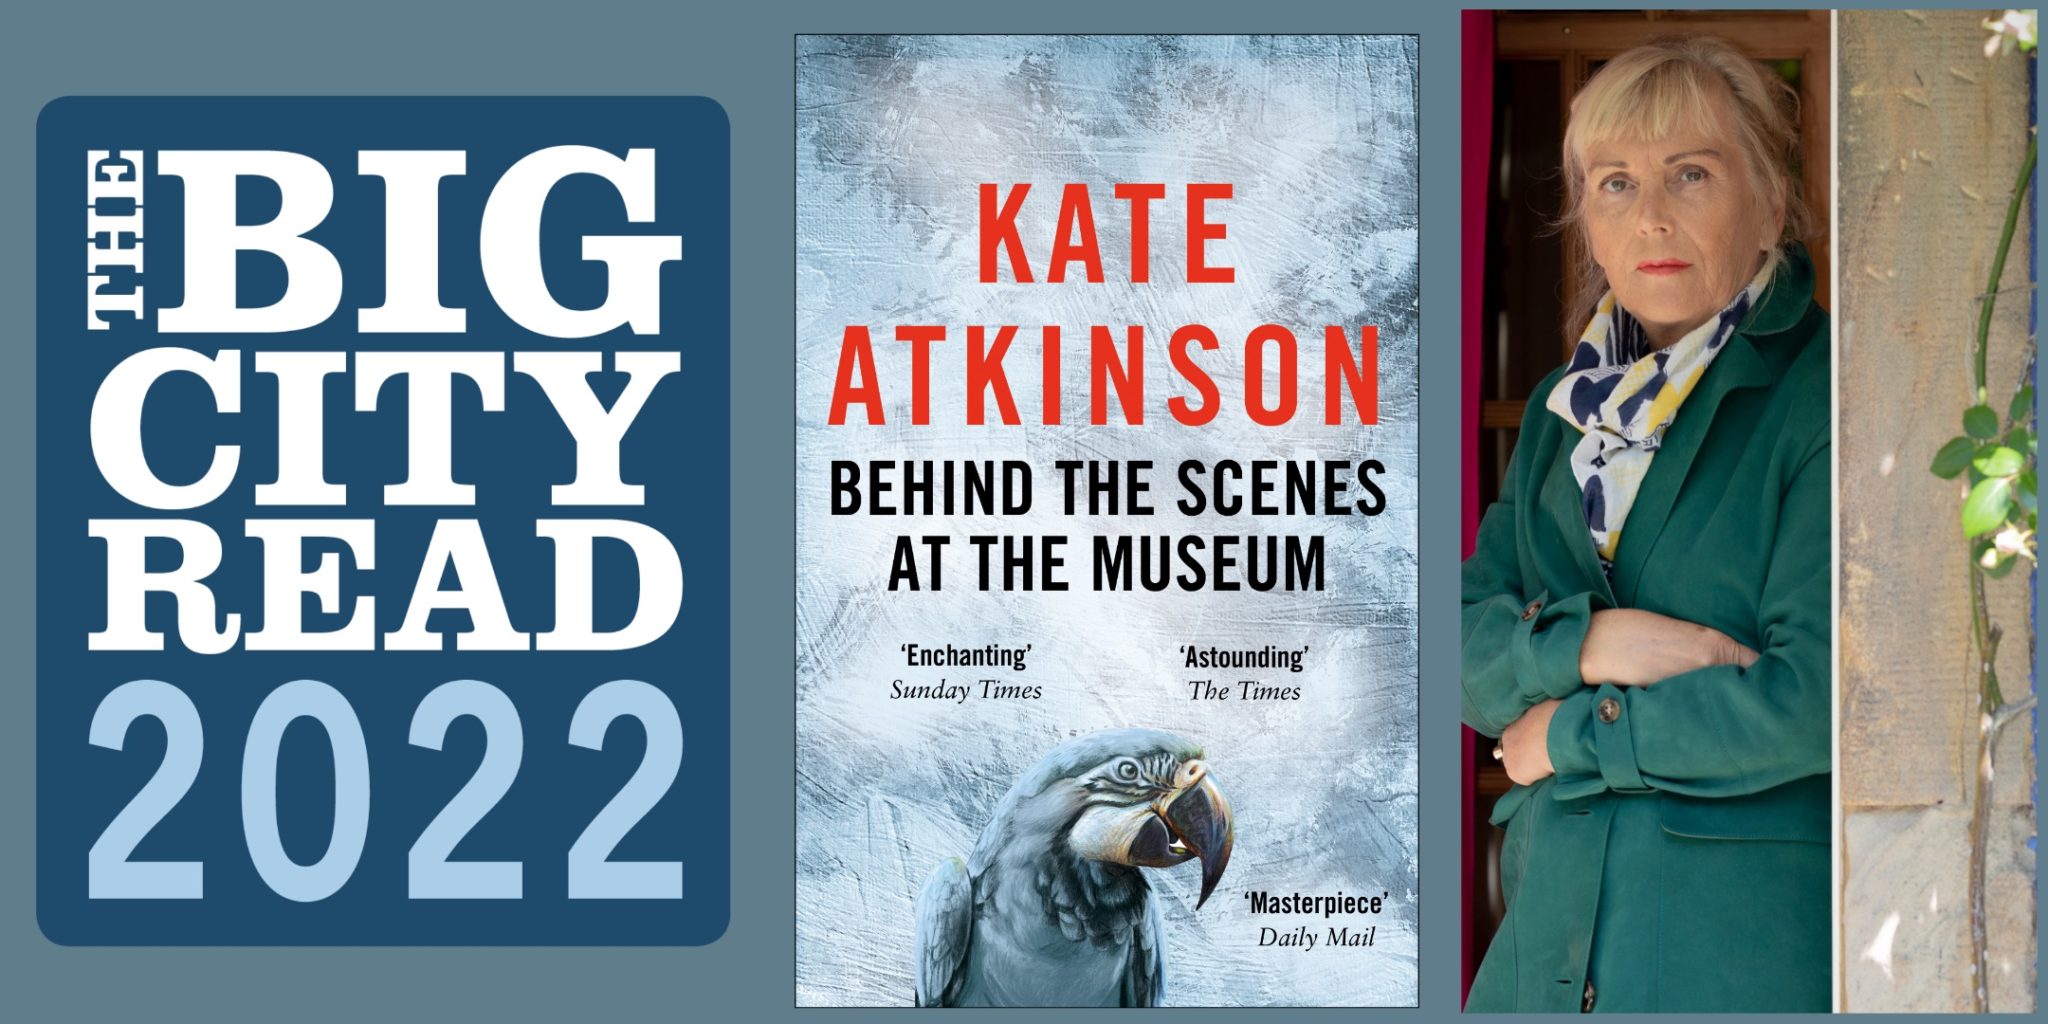 Image include photo of Kate Atkinson, the front cover of the book 'Behind the Scenes At The Museum' and large logo with text that reads 'The Big City Read 2022'.